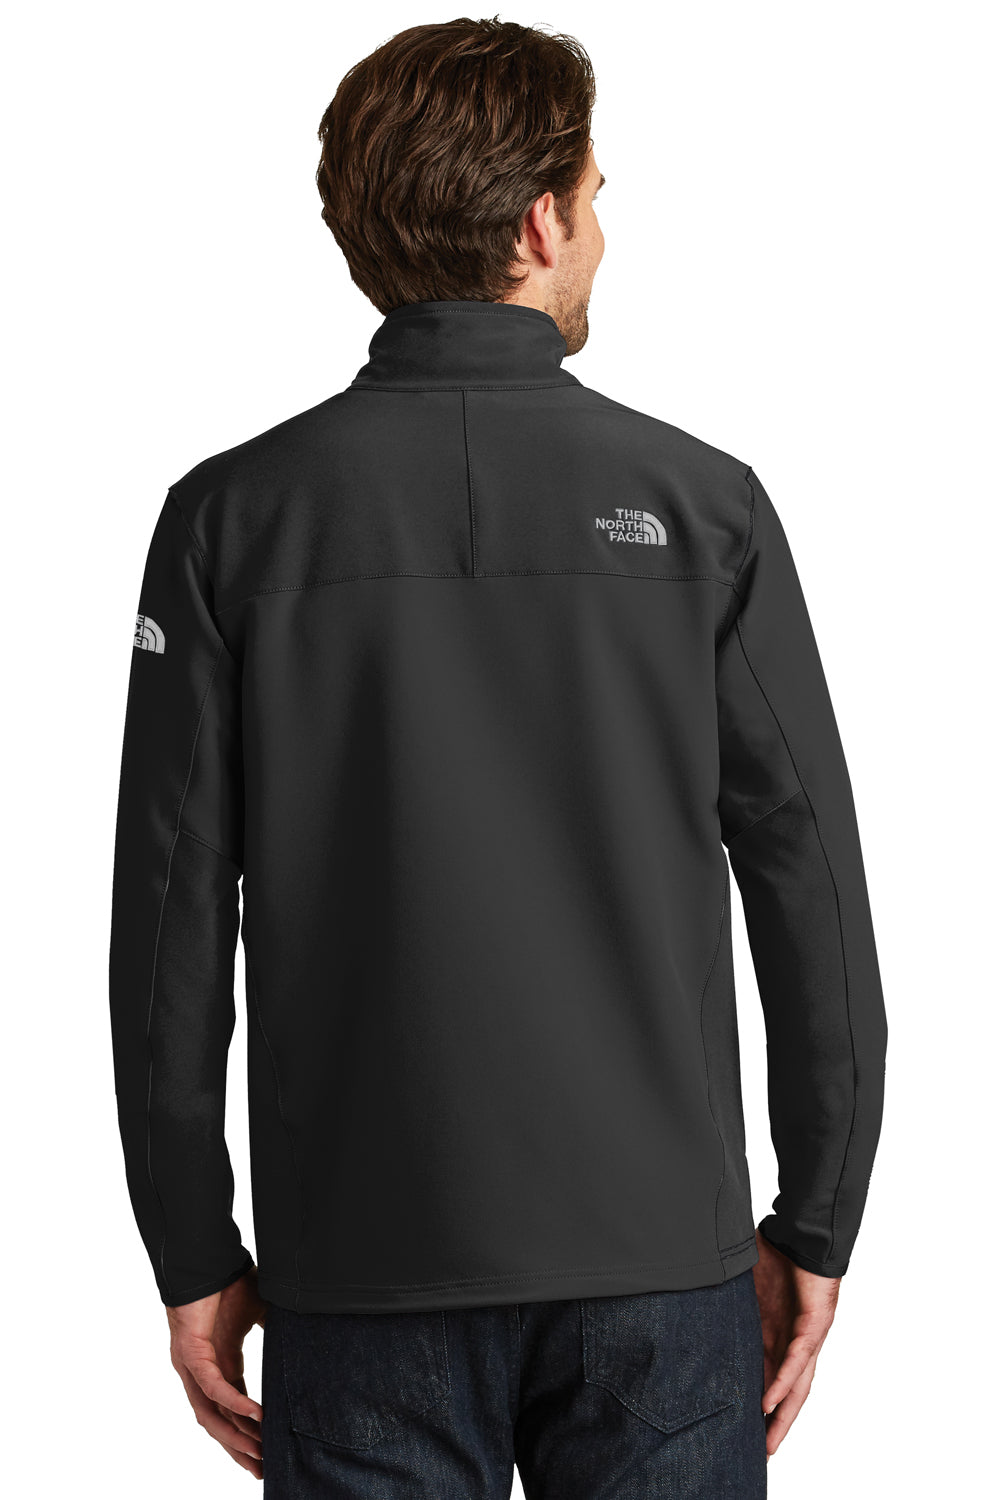 The North Face NF0A3LGV Mens Tech Wind & Water Resistant Full Zip Jacket Black Back